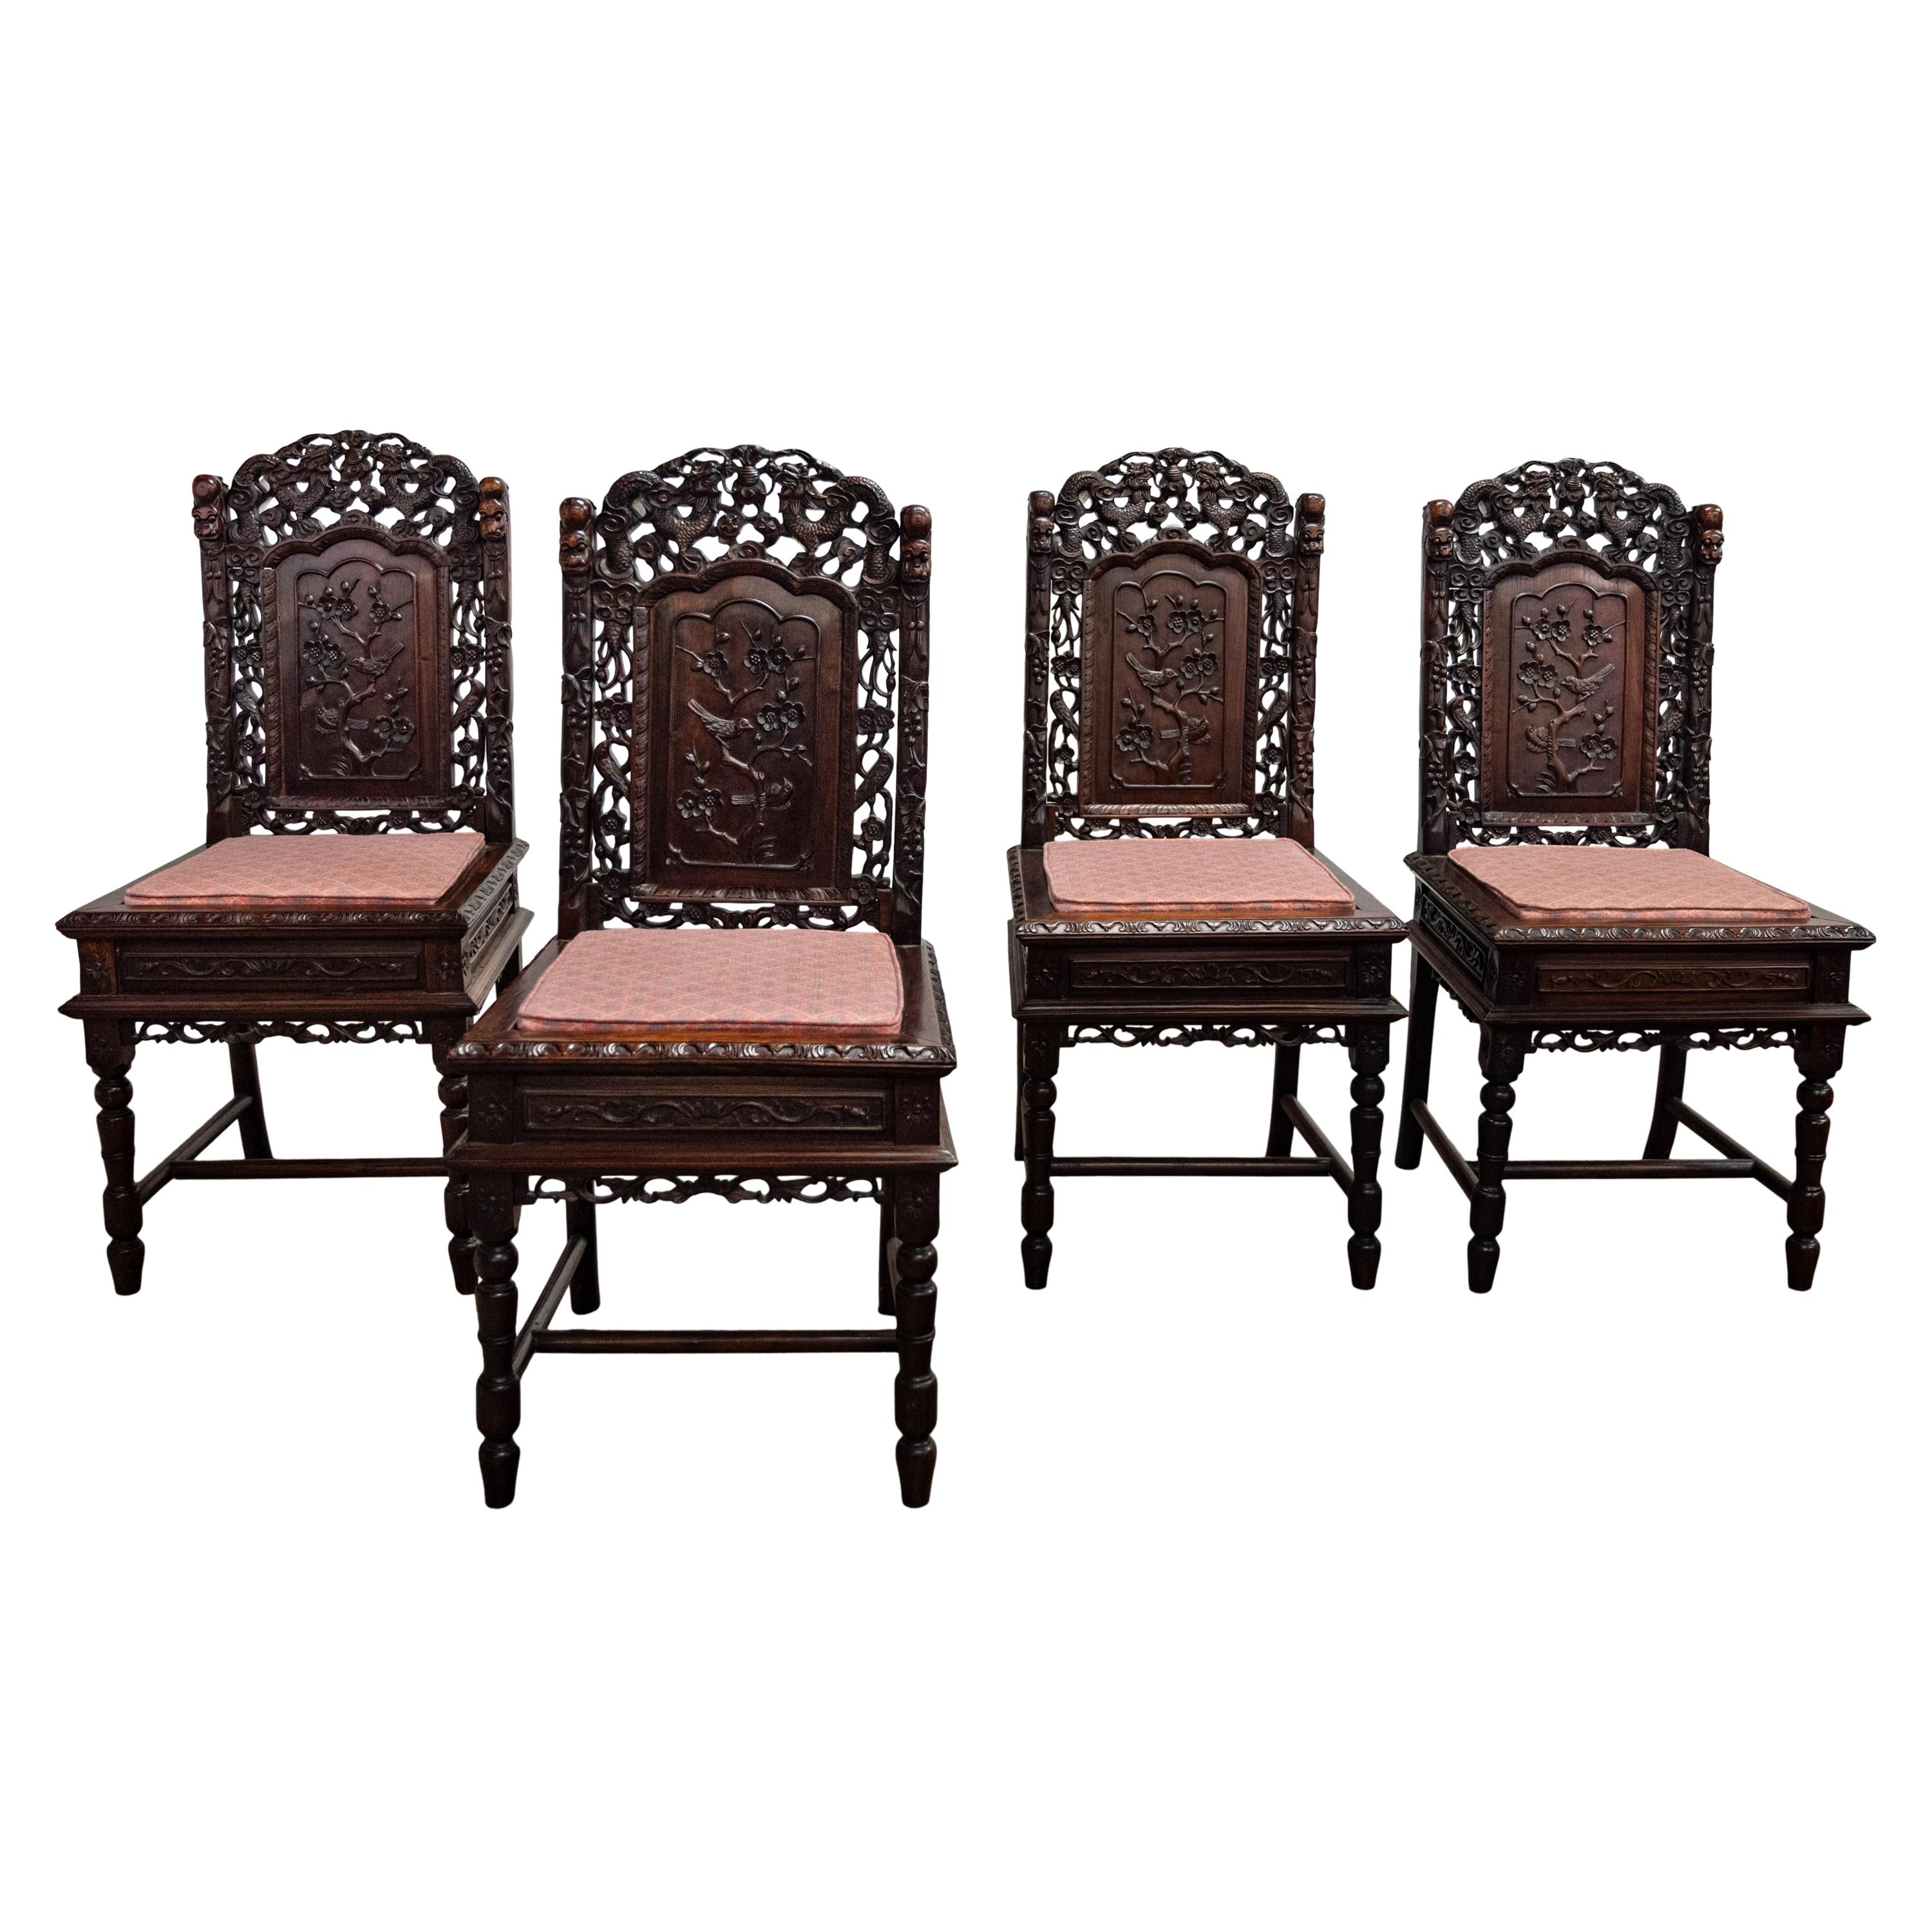 Four Antique Qing Dynasty Chinese Carved Rosewood Side Dining Dragon Chairs 1880 For Sale 2